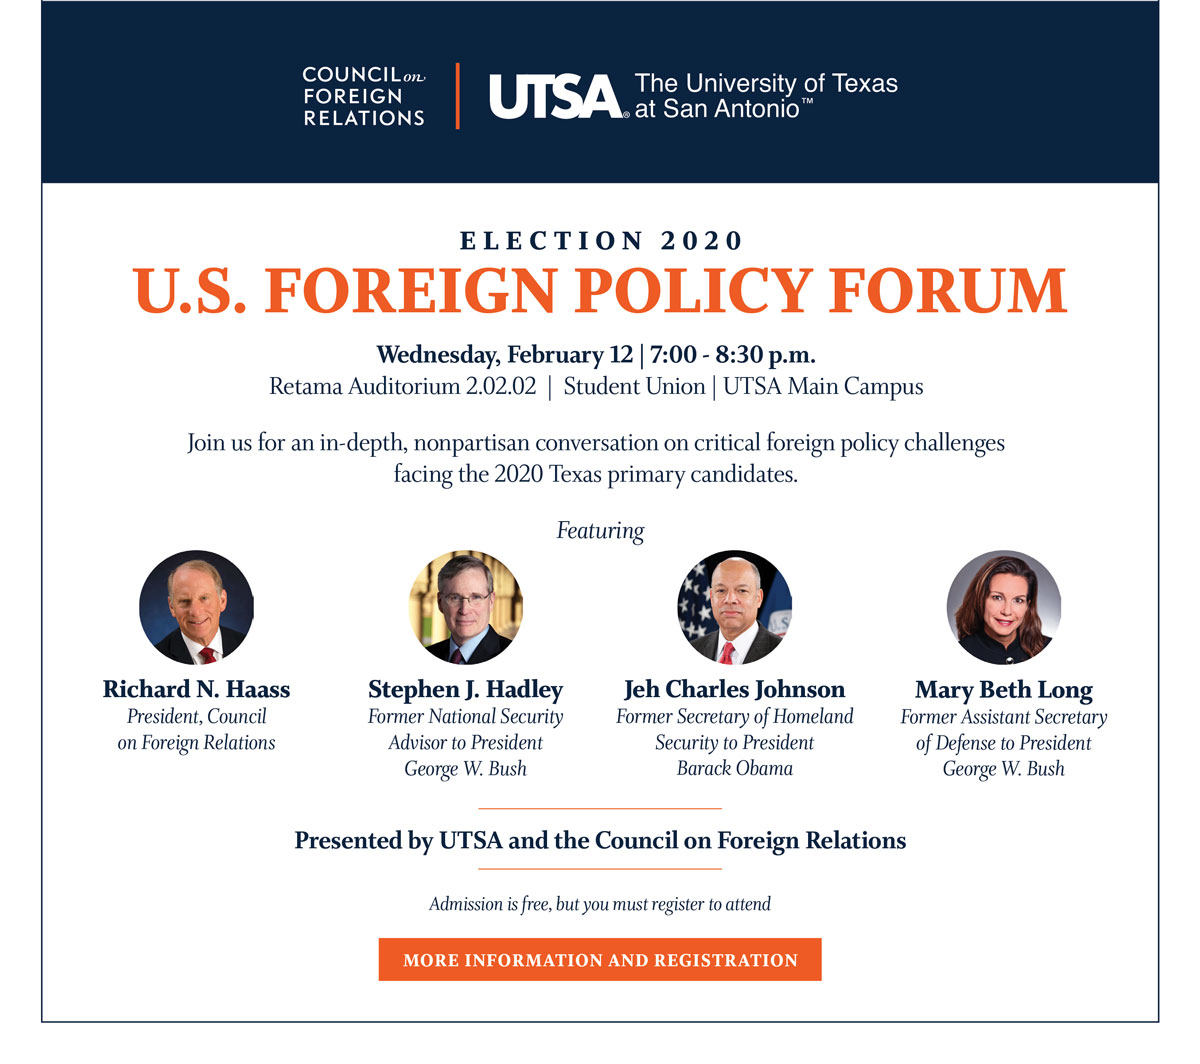 Election 2020: U.S. Foreign Policy Forum